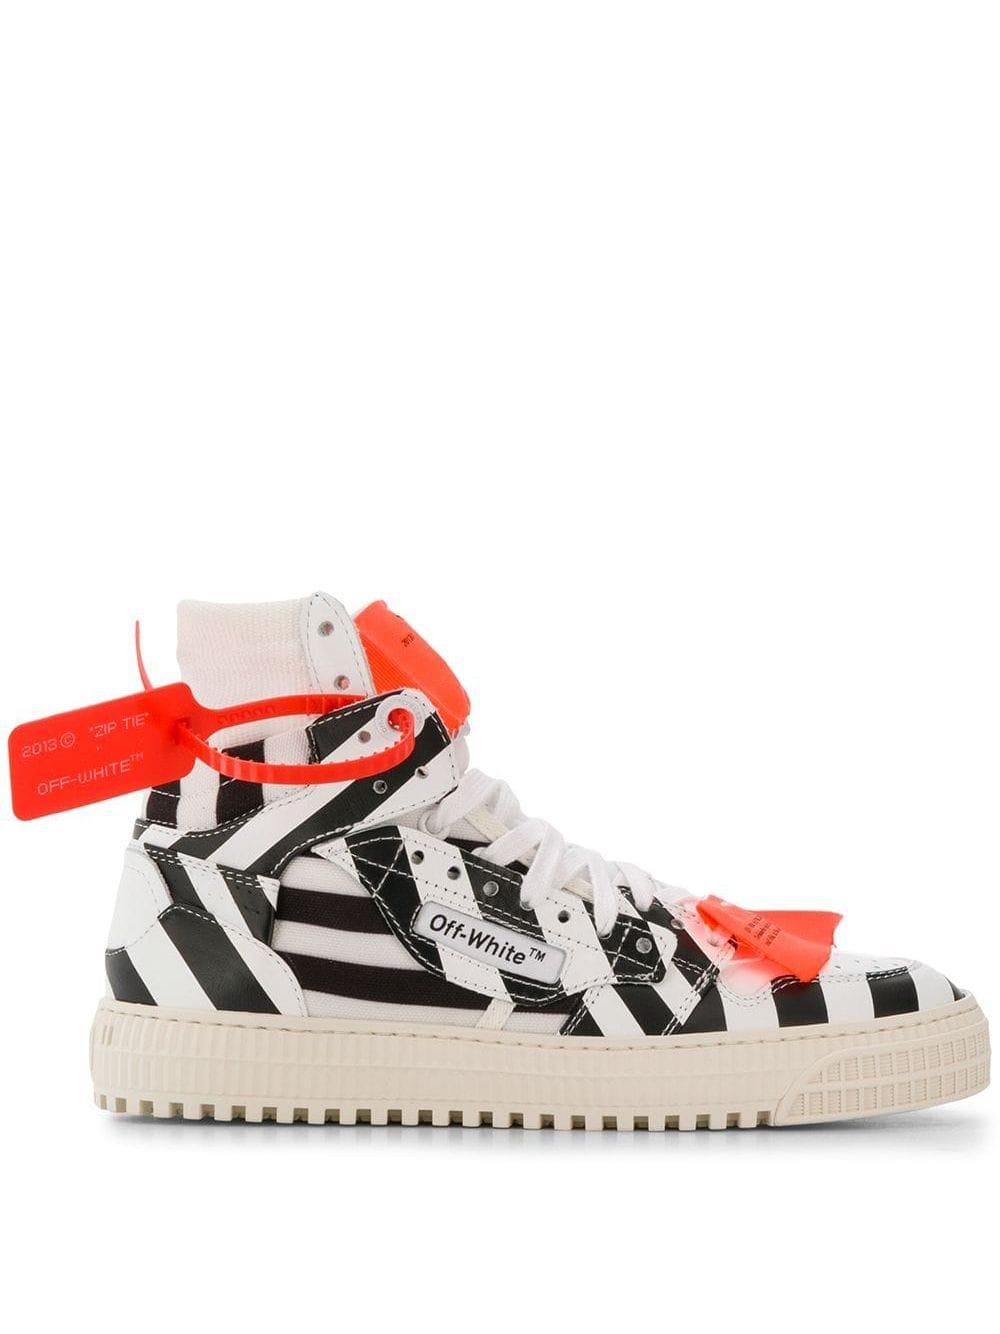 Off-White Virgil Abloh Striped 3.0 Off-court Sneakers in White | Lyst